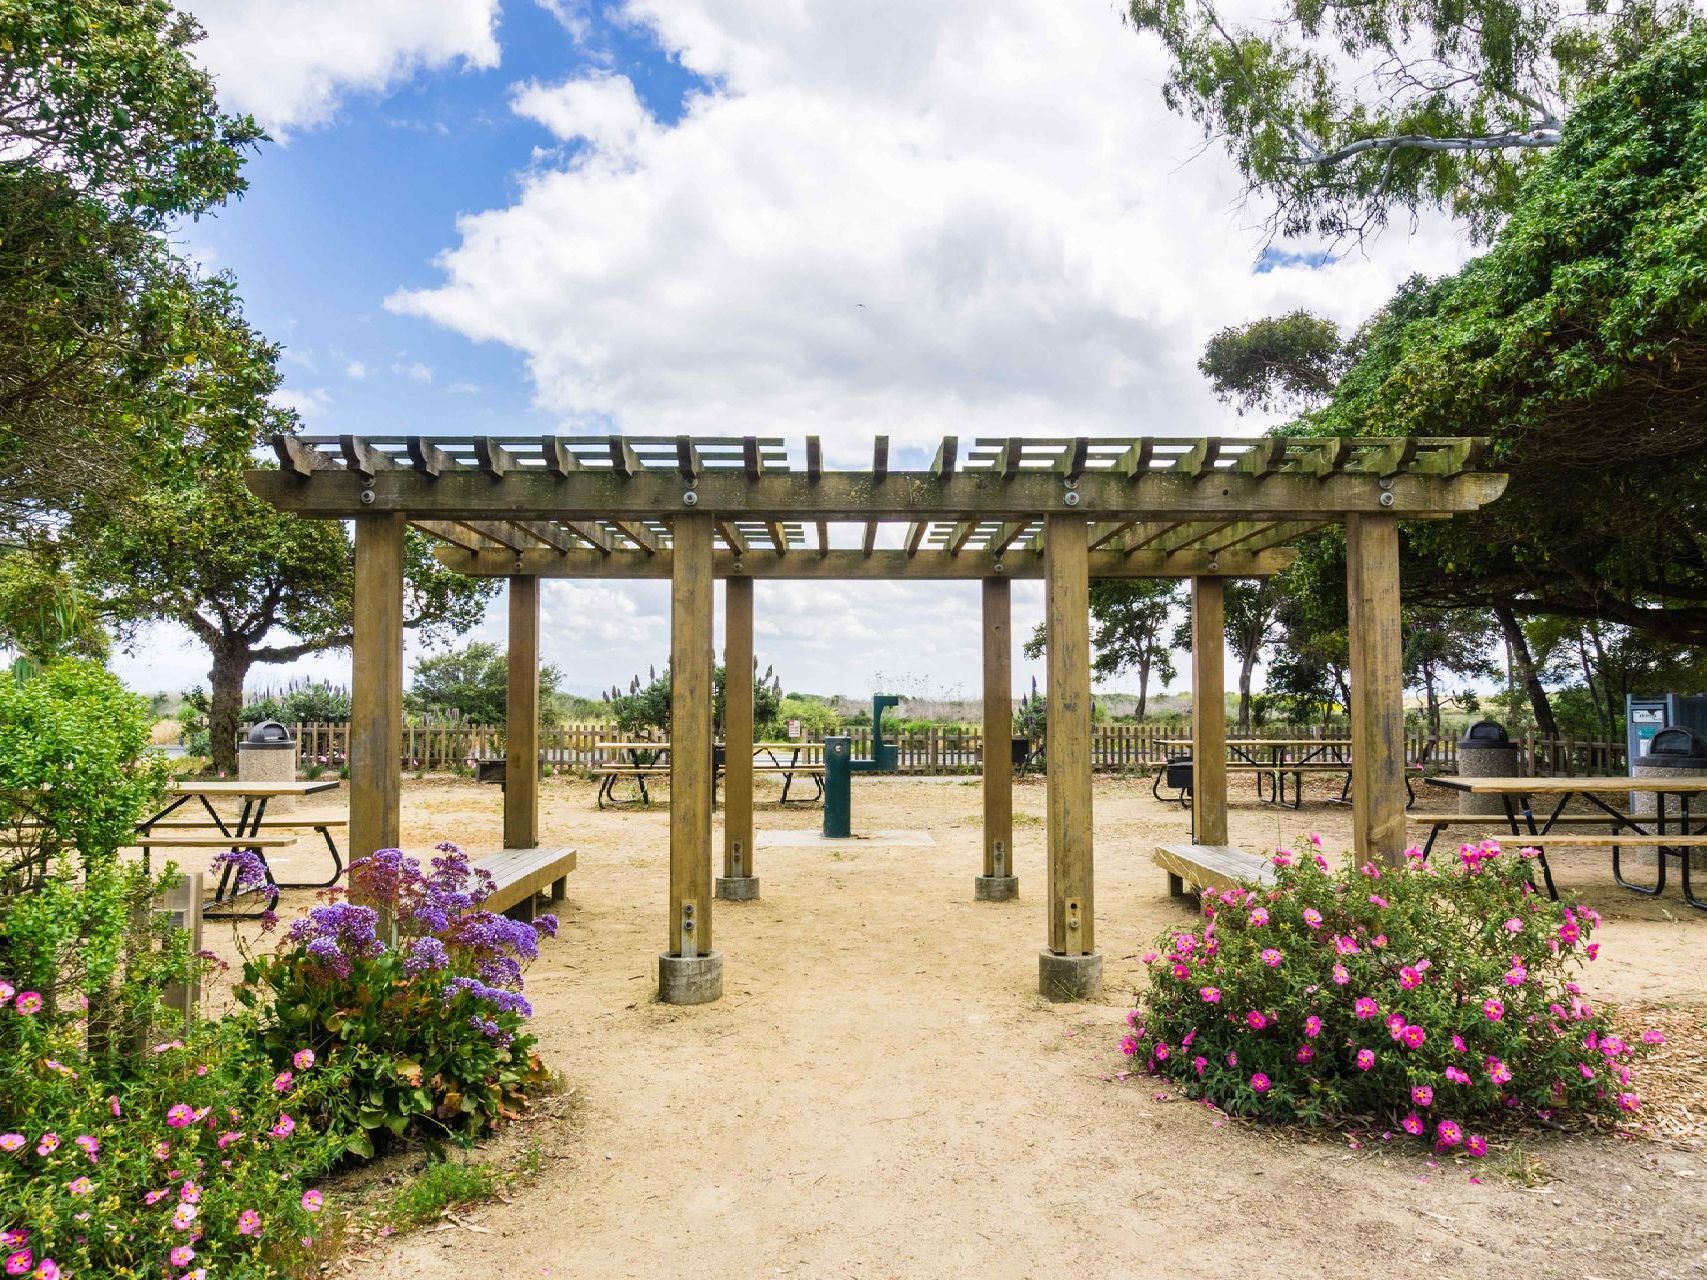 Picnic area with tables and pergola surrounded by flowers